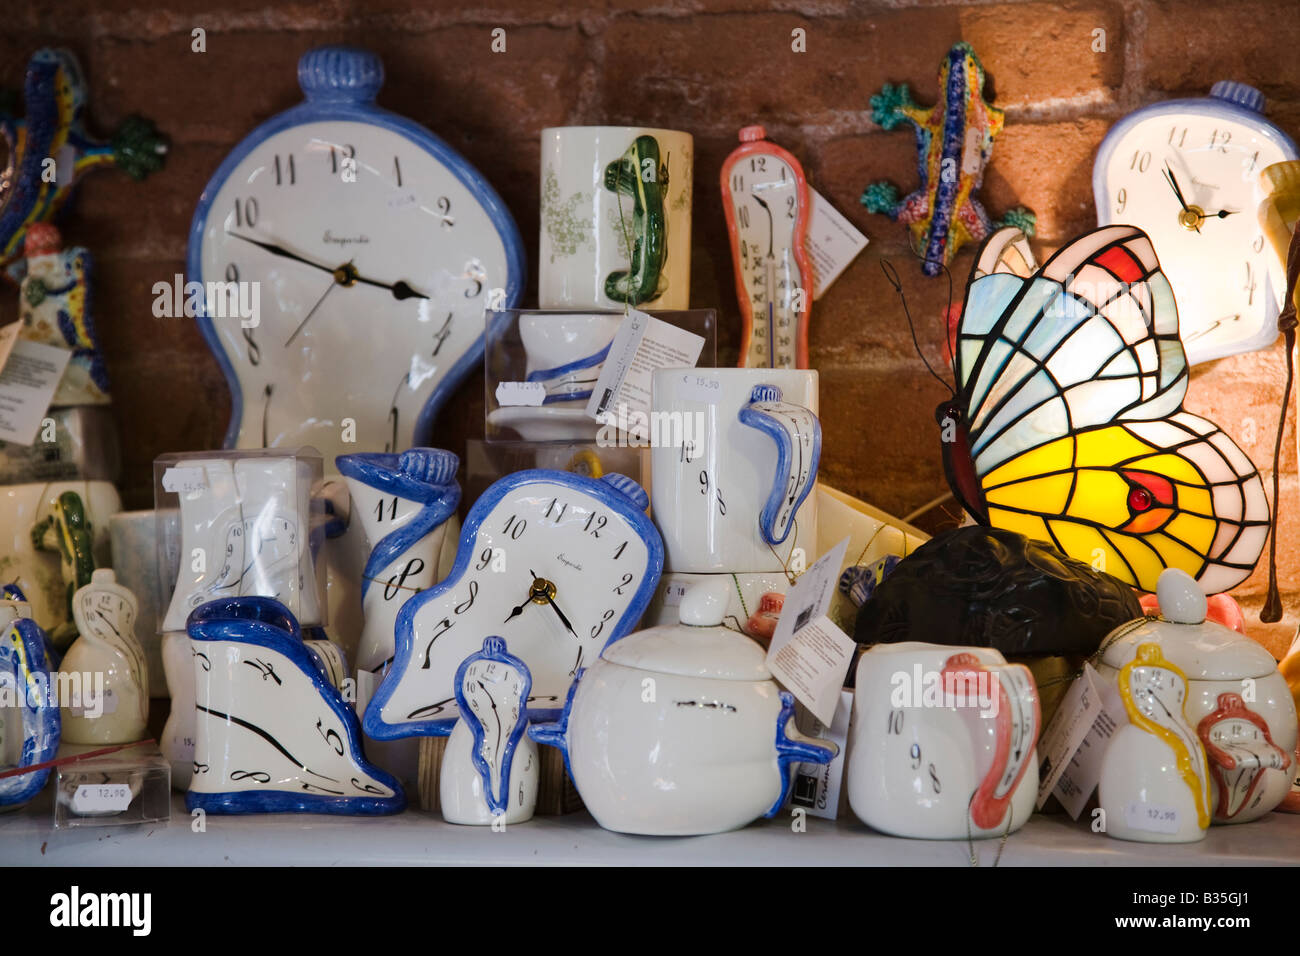 SPAIN Barcelona Gift shop items of Salvador Dali melting clock ceramic and stained glass cups and decorative items Stock Photo